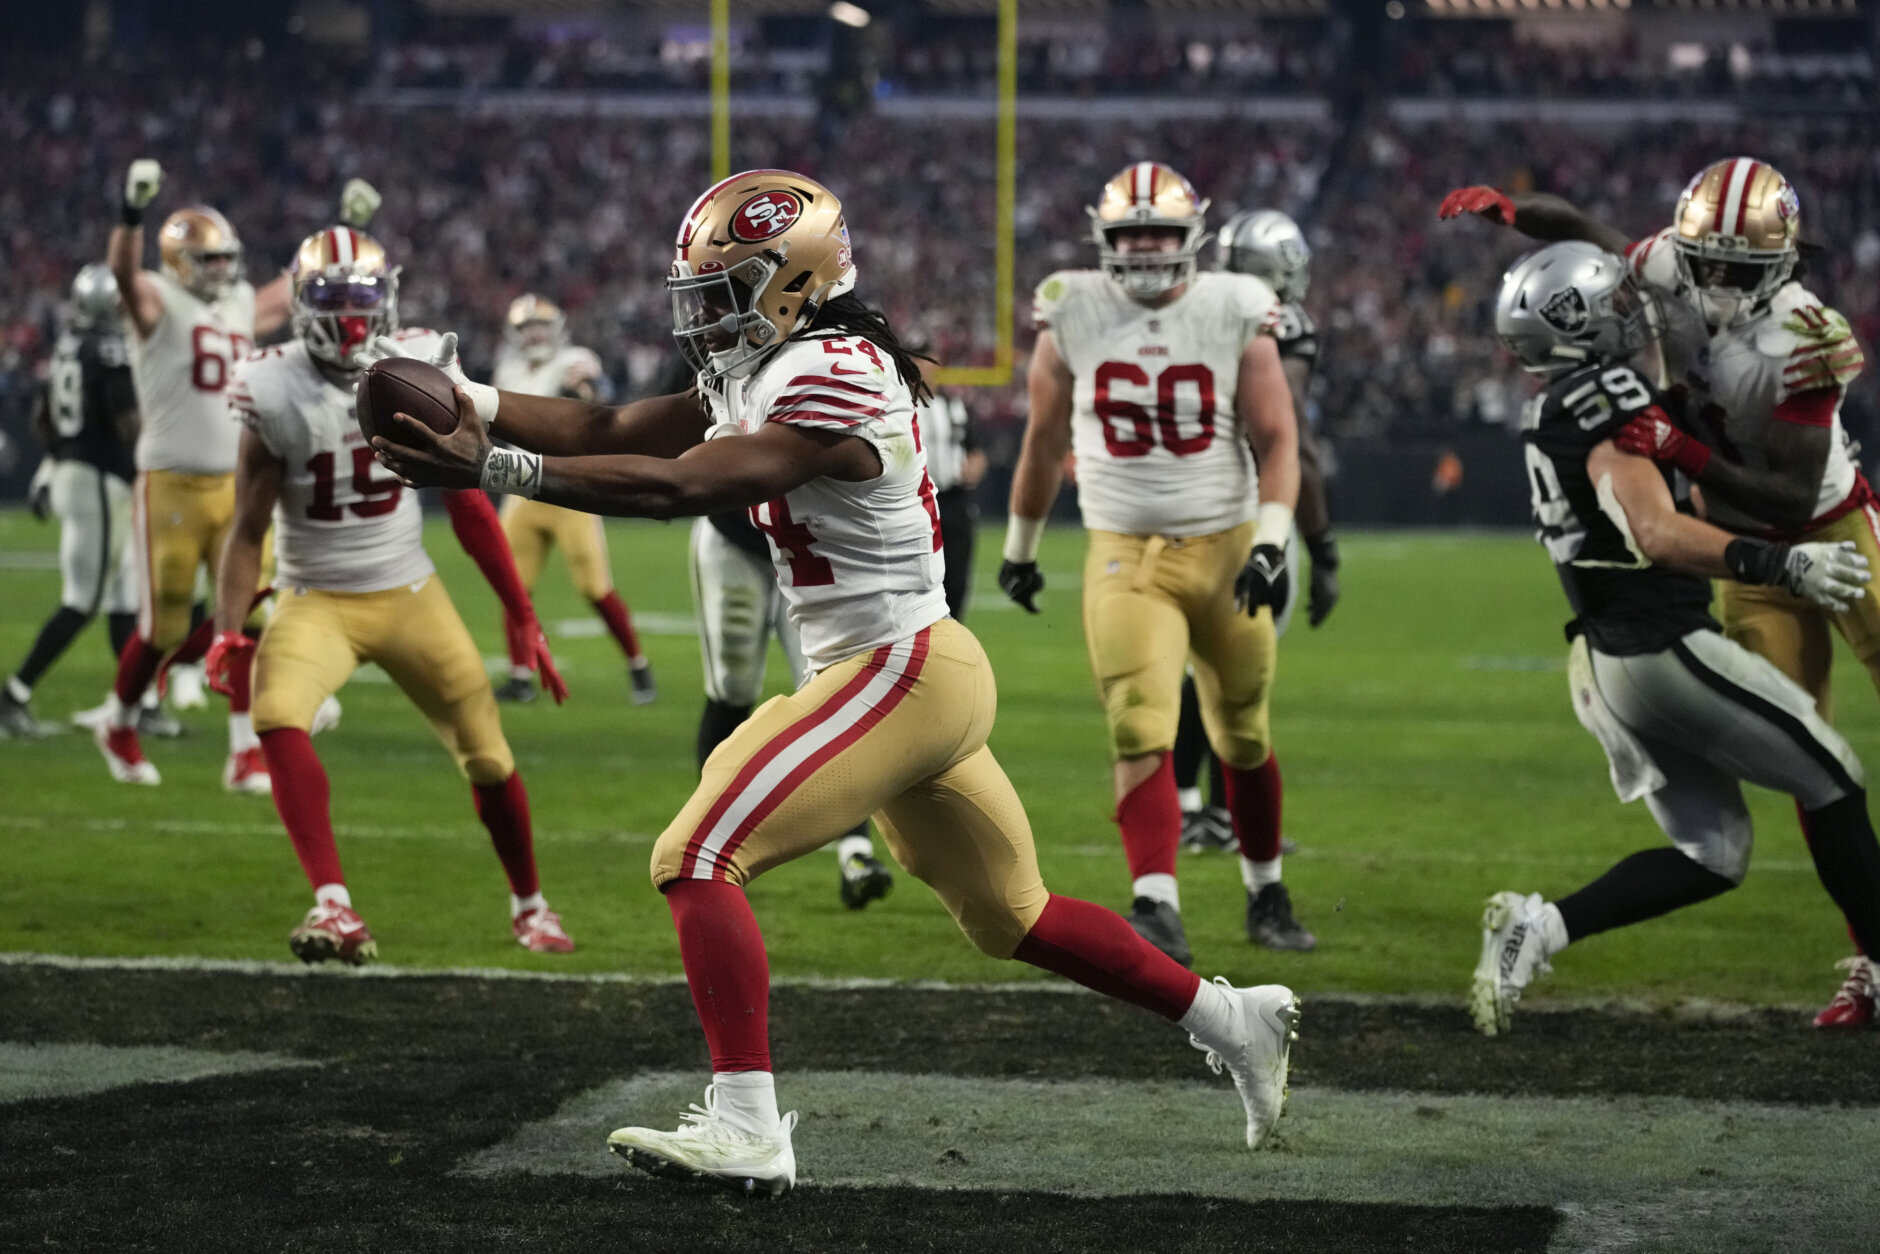 <p><b><i>49ers 37</i></b><br />
<b><i>Raiders 34 (OT)</i></b></p>
<p>These two former Bay Area neighbors couldn’t have grown further apart.</p>
<p>San Francisco is enjoying its longest win streak (nine games) since 1997 and looks like a Super Bowl contender <a href="https://profootballtalk.nbcsports.com/2022/12/30/kyle-shanahan-would-support-nick-bosa-for-overall-mvp/">with an MVP defender</a>, while Vegas&#8217; bad gamble on Josh McDaniels is <a href="https://www.raidersbeat.com/former-raiders-linebacker-laments-the-loss-of-rich-bisaccia-calls-josh-mcdaniels-tenure-in-las-vegas-a-complete-disaster-so-far/">&#8220;a complete disaster&#8221;</a> that&#8217;s setting the franchise back years. Hey, at least it frees up Derek Carr to come to Washington!</p>
